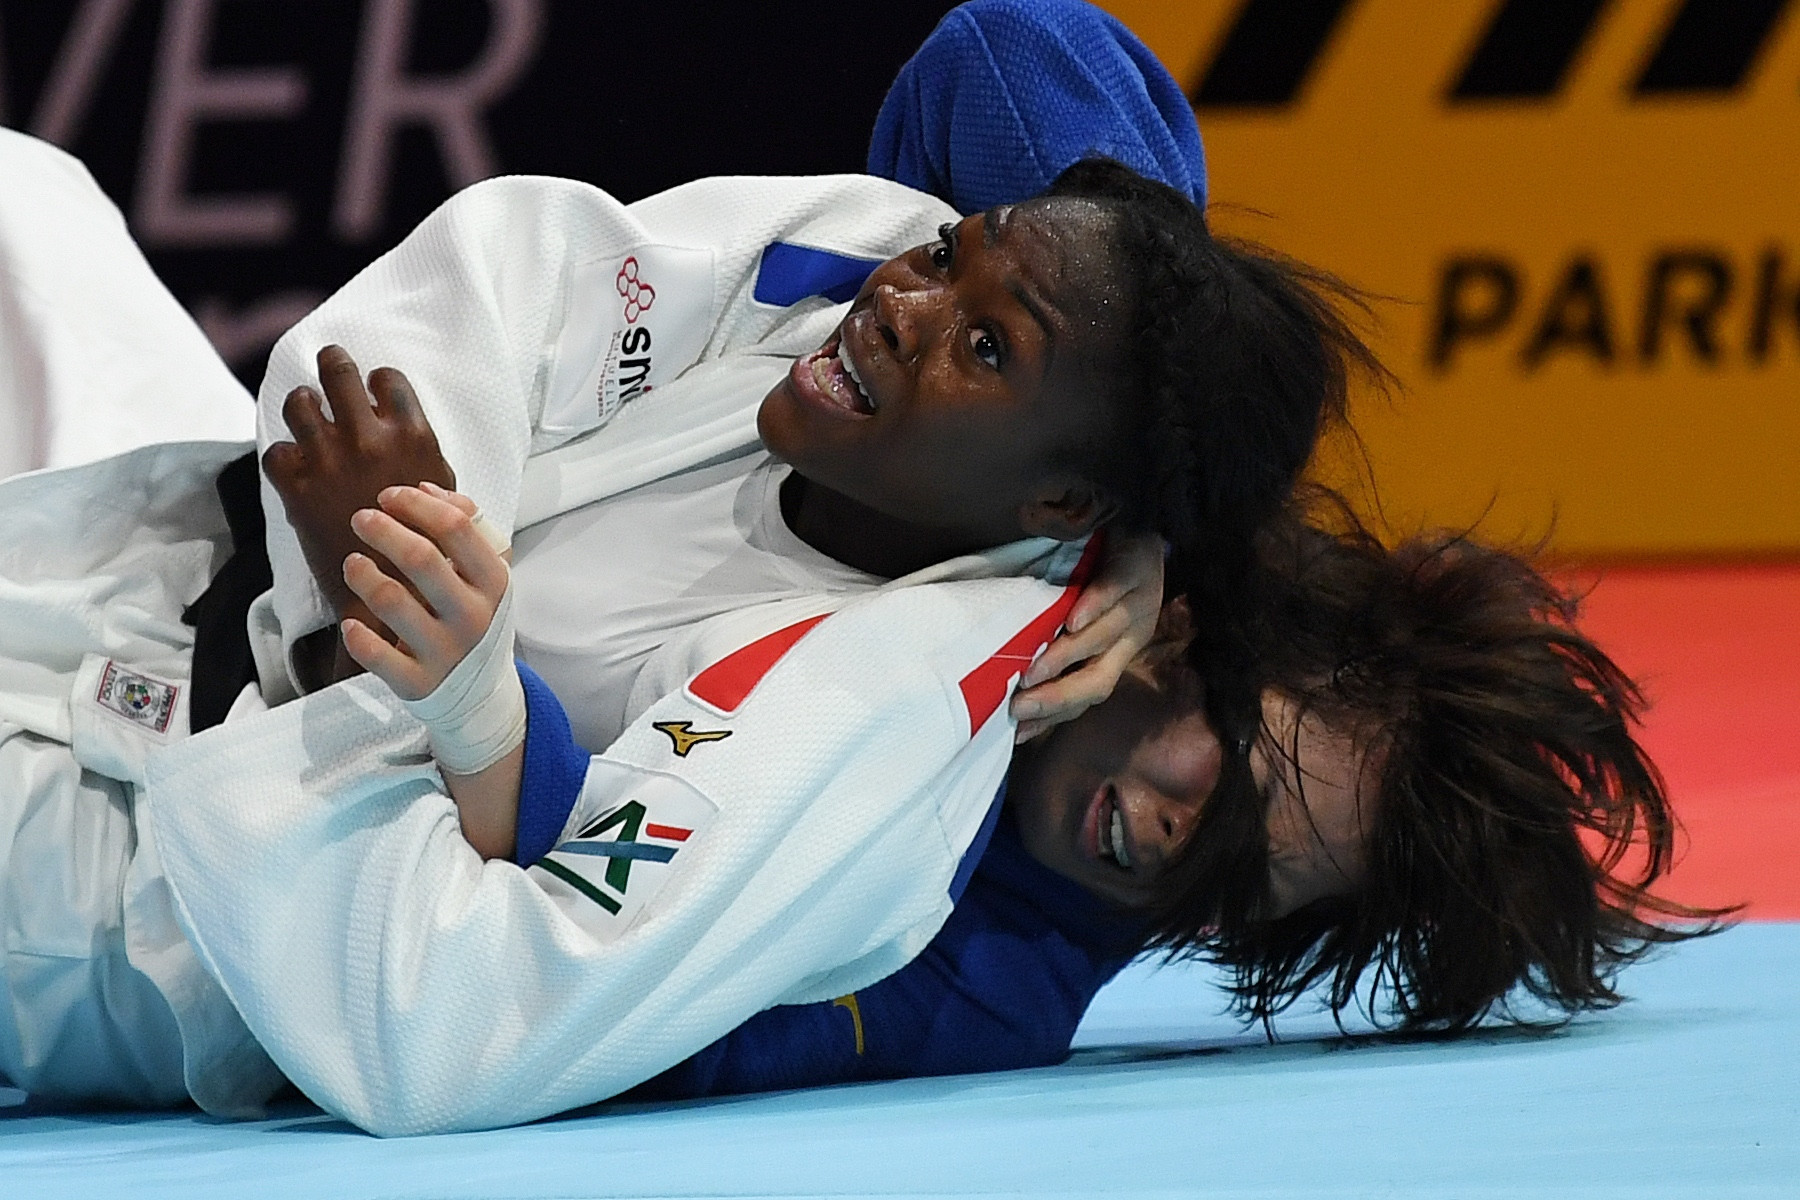 Clarisse Agbegnenou won her fourth world title, and third in succession, after a thrilling clash ©Getty Images